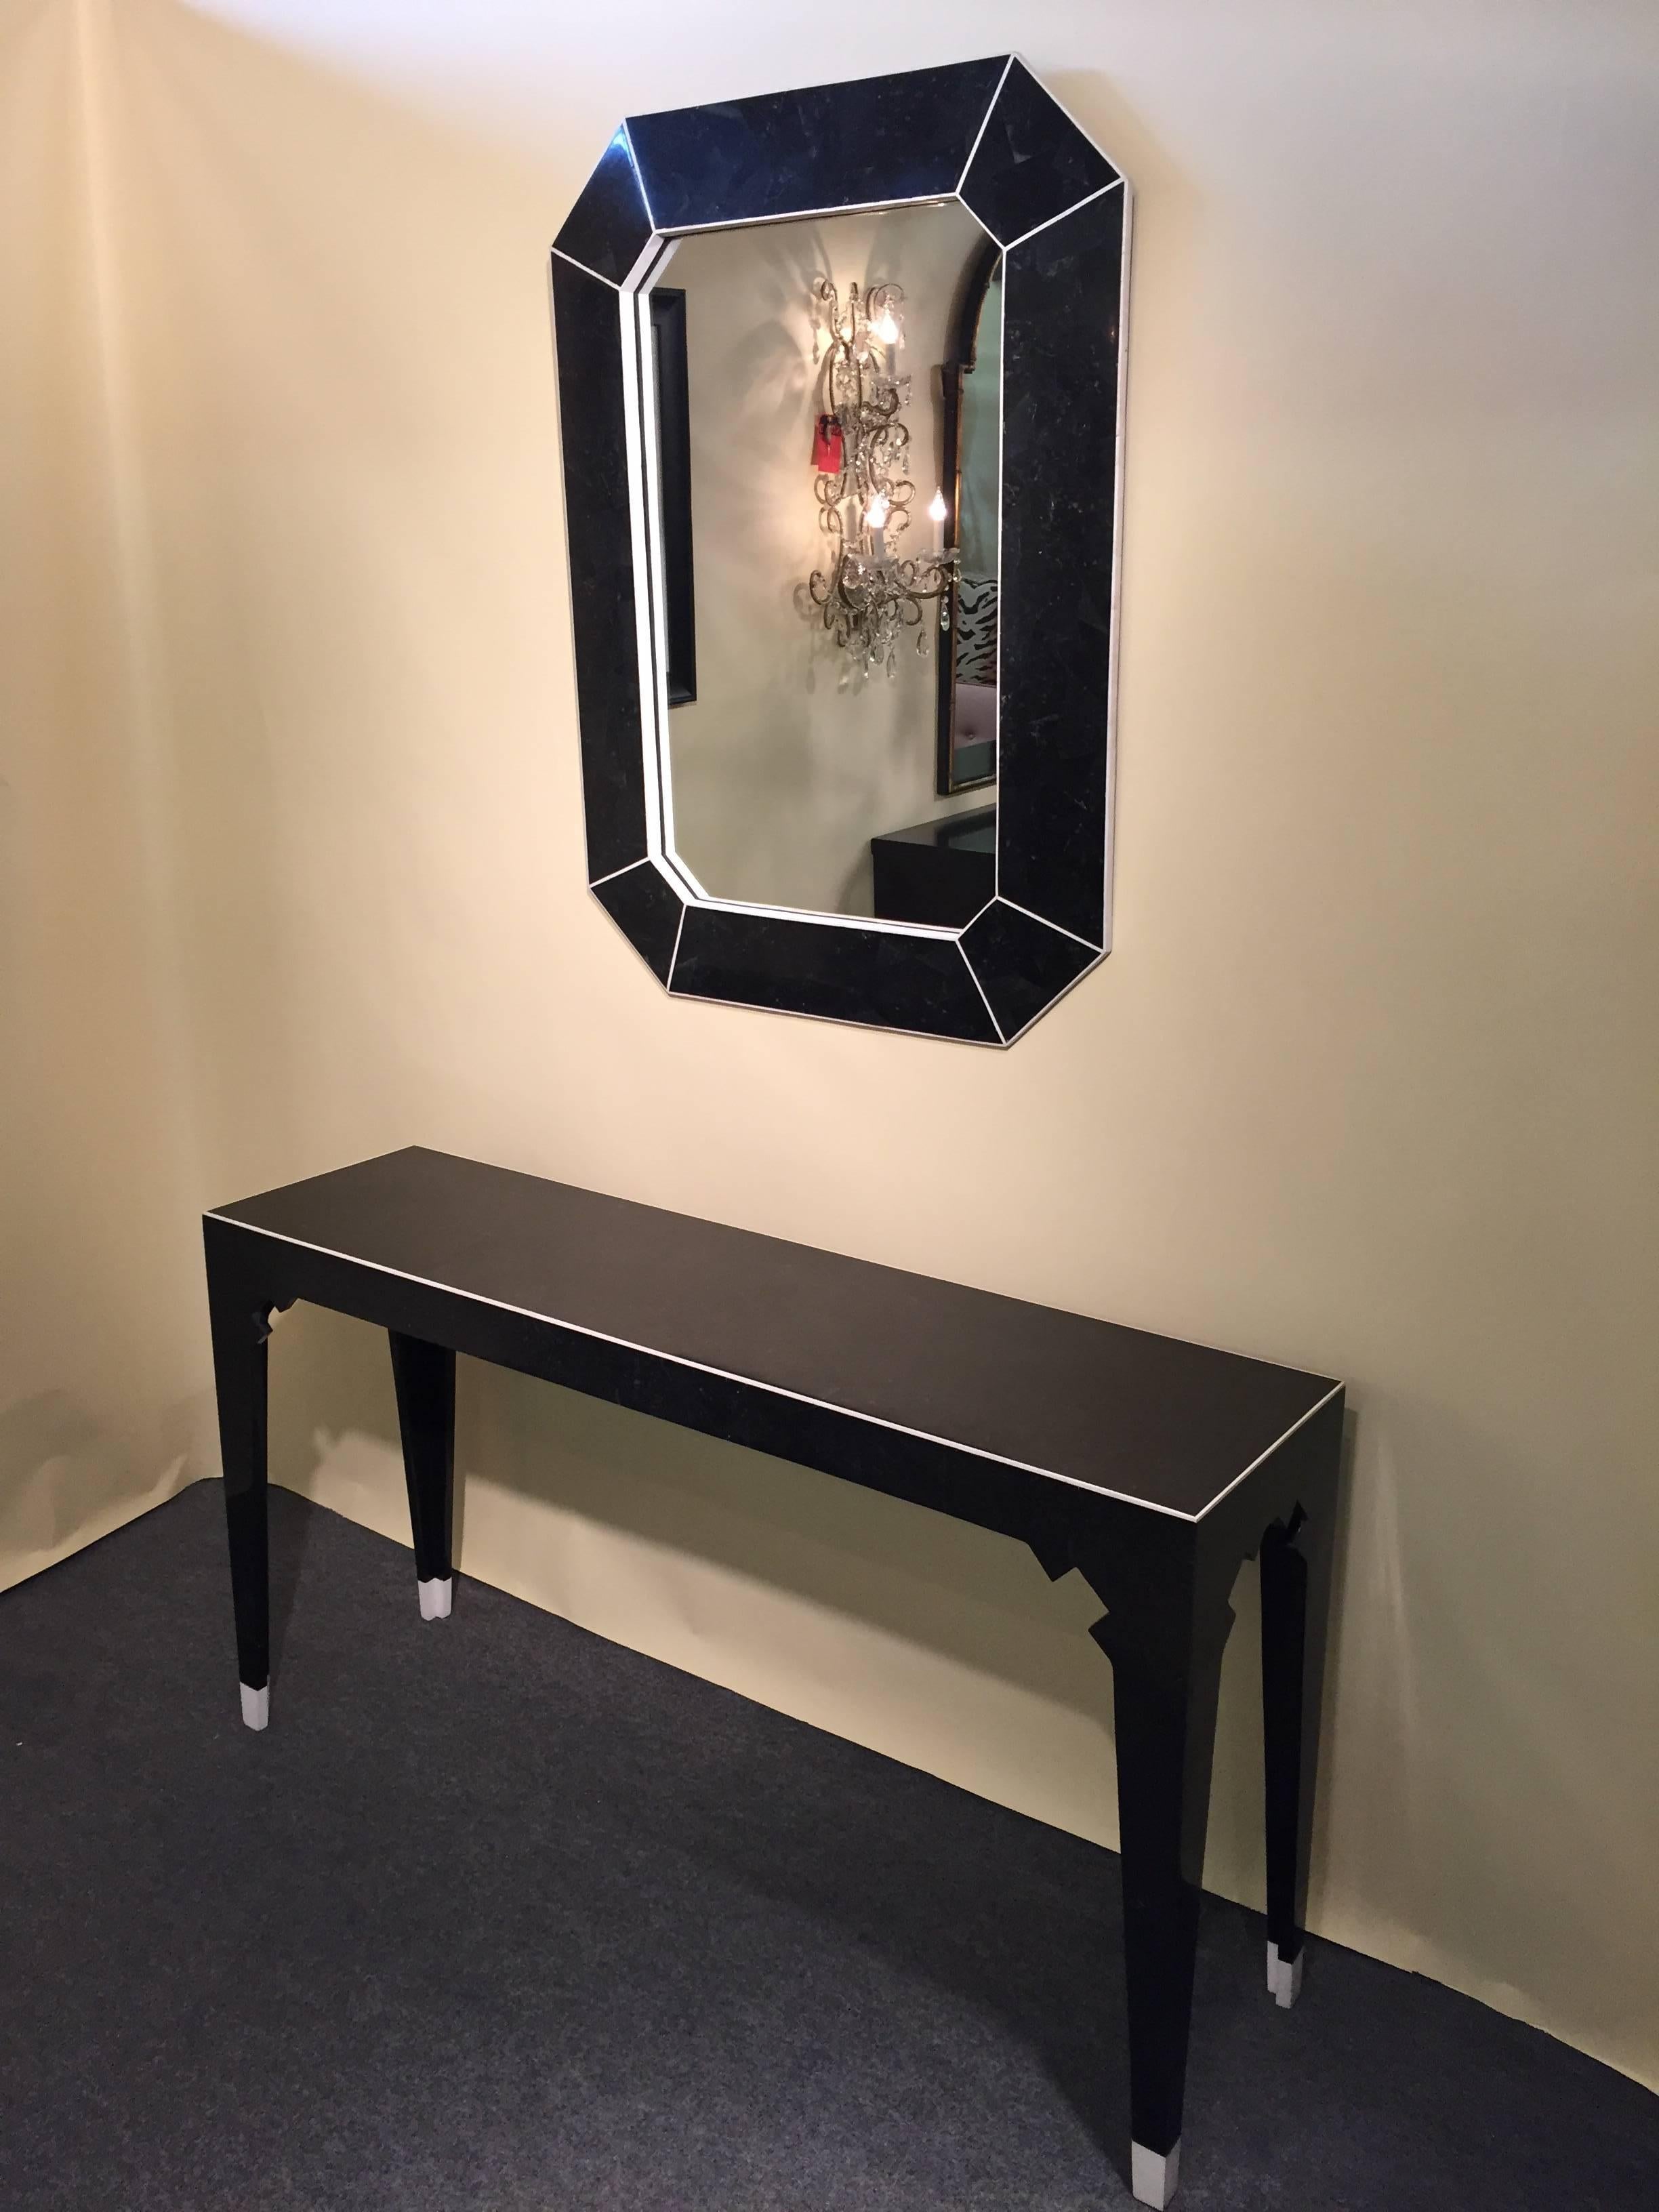 Gene Jonson and Robert Marcius black and white fossil stone geometric inlaid console with matching mirror. Completely covered with fossil stone, white stone edged, possibly.

The measurements for the mirror 40 high x 30 wide x 1.75 deep.